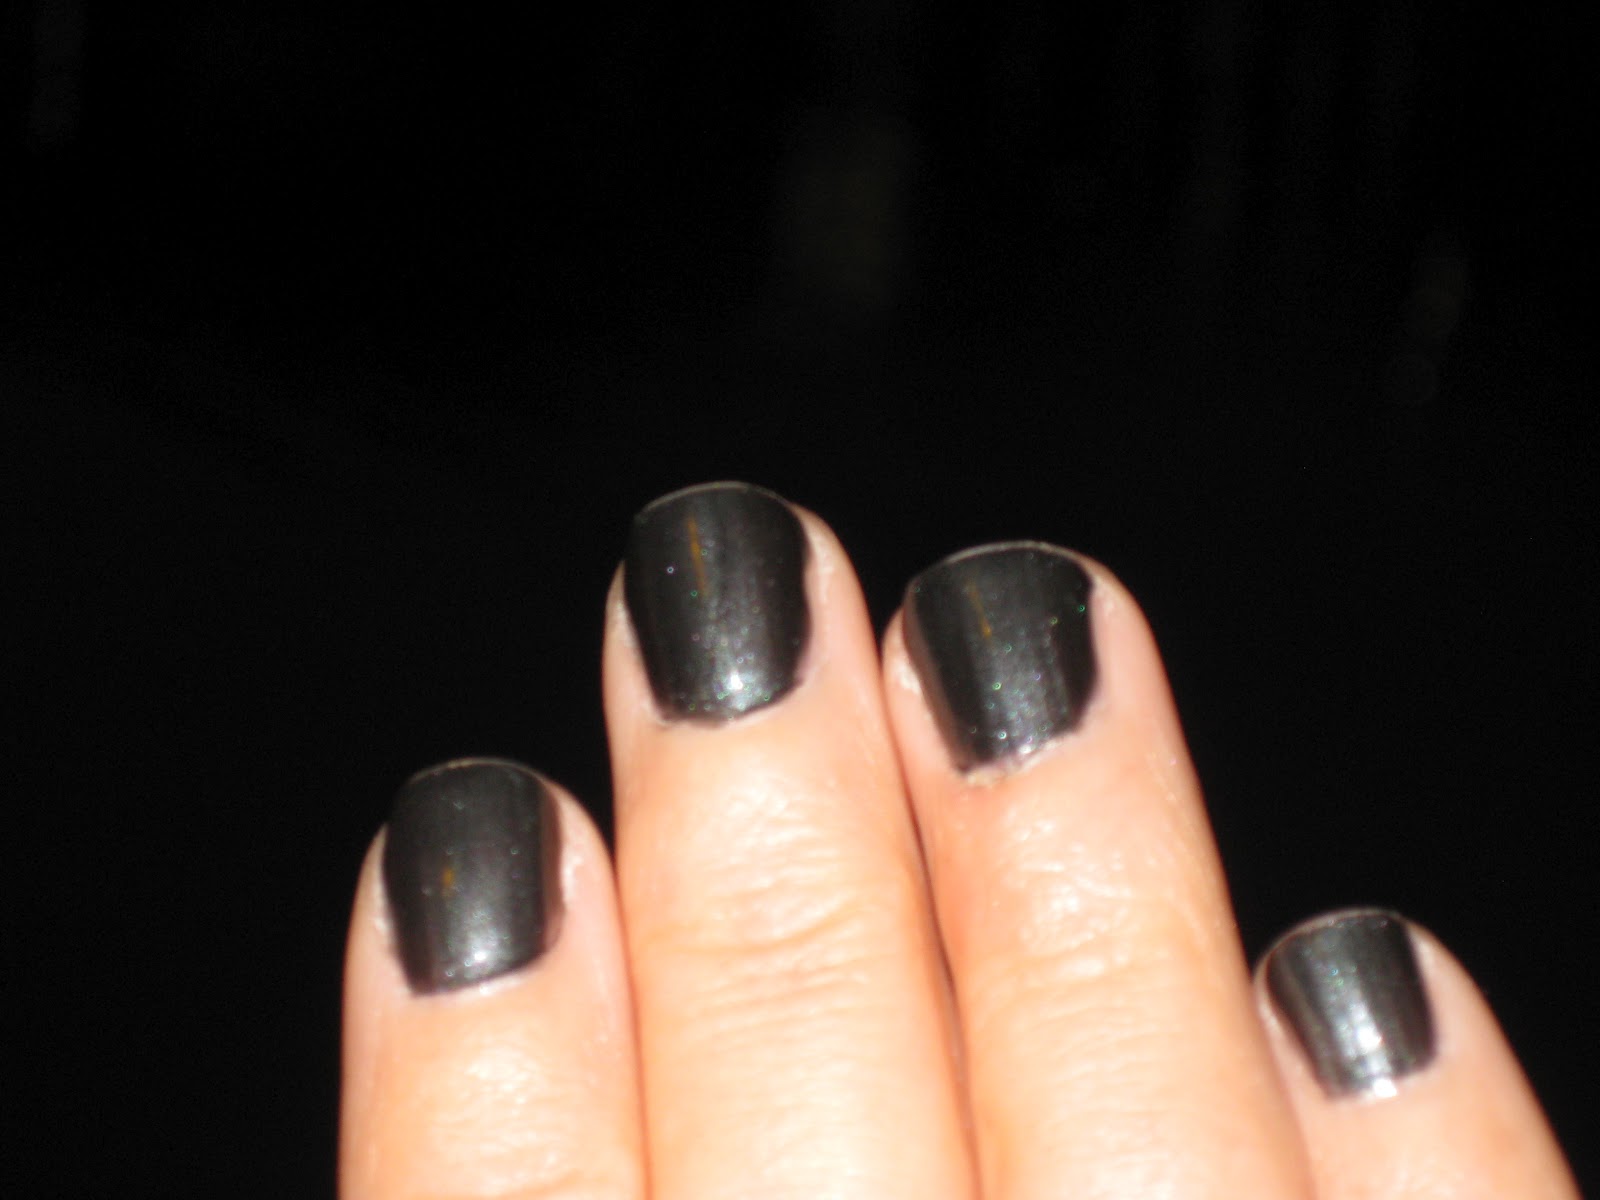 4. China Glaze Nail Lacquer in "Feet Don't Fail Me Now" - wide 9